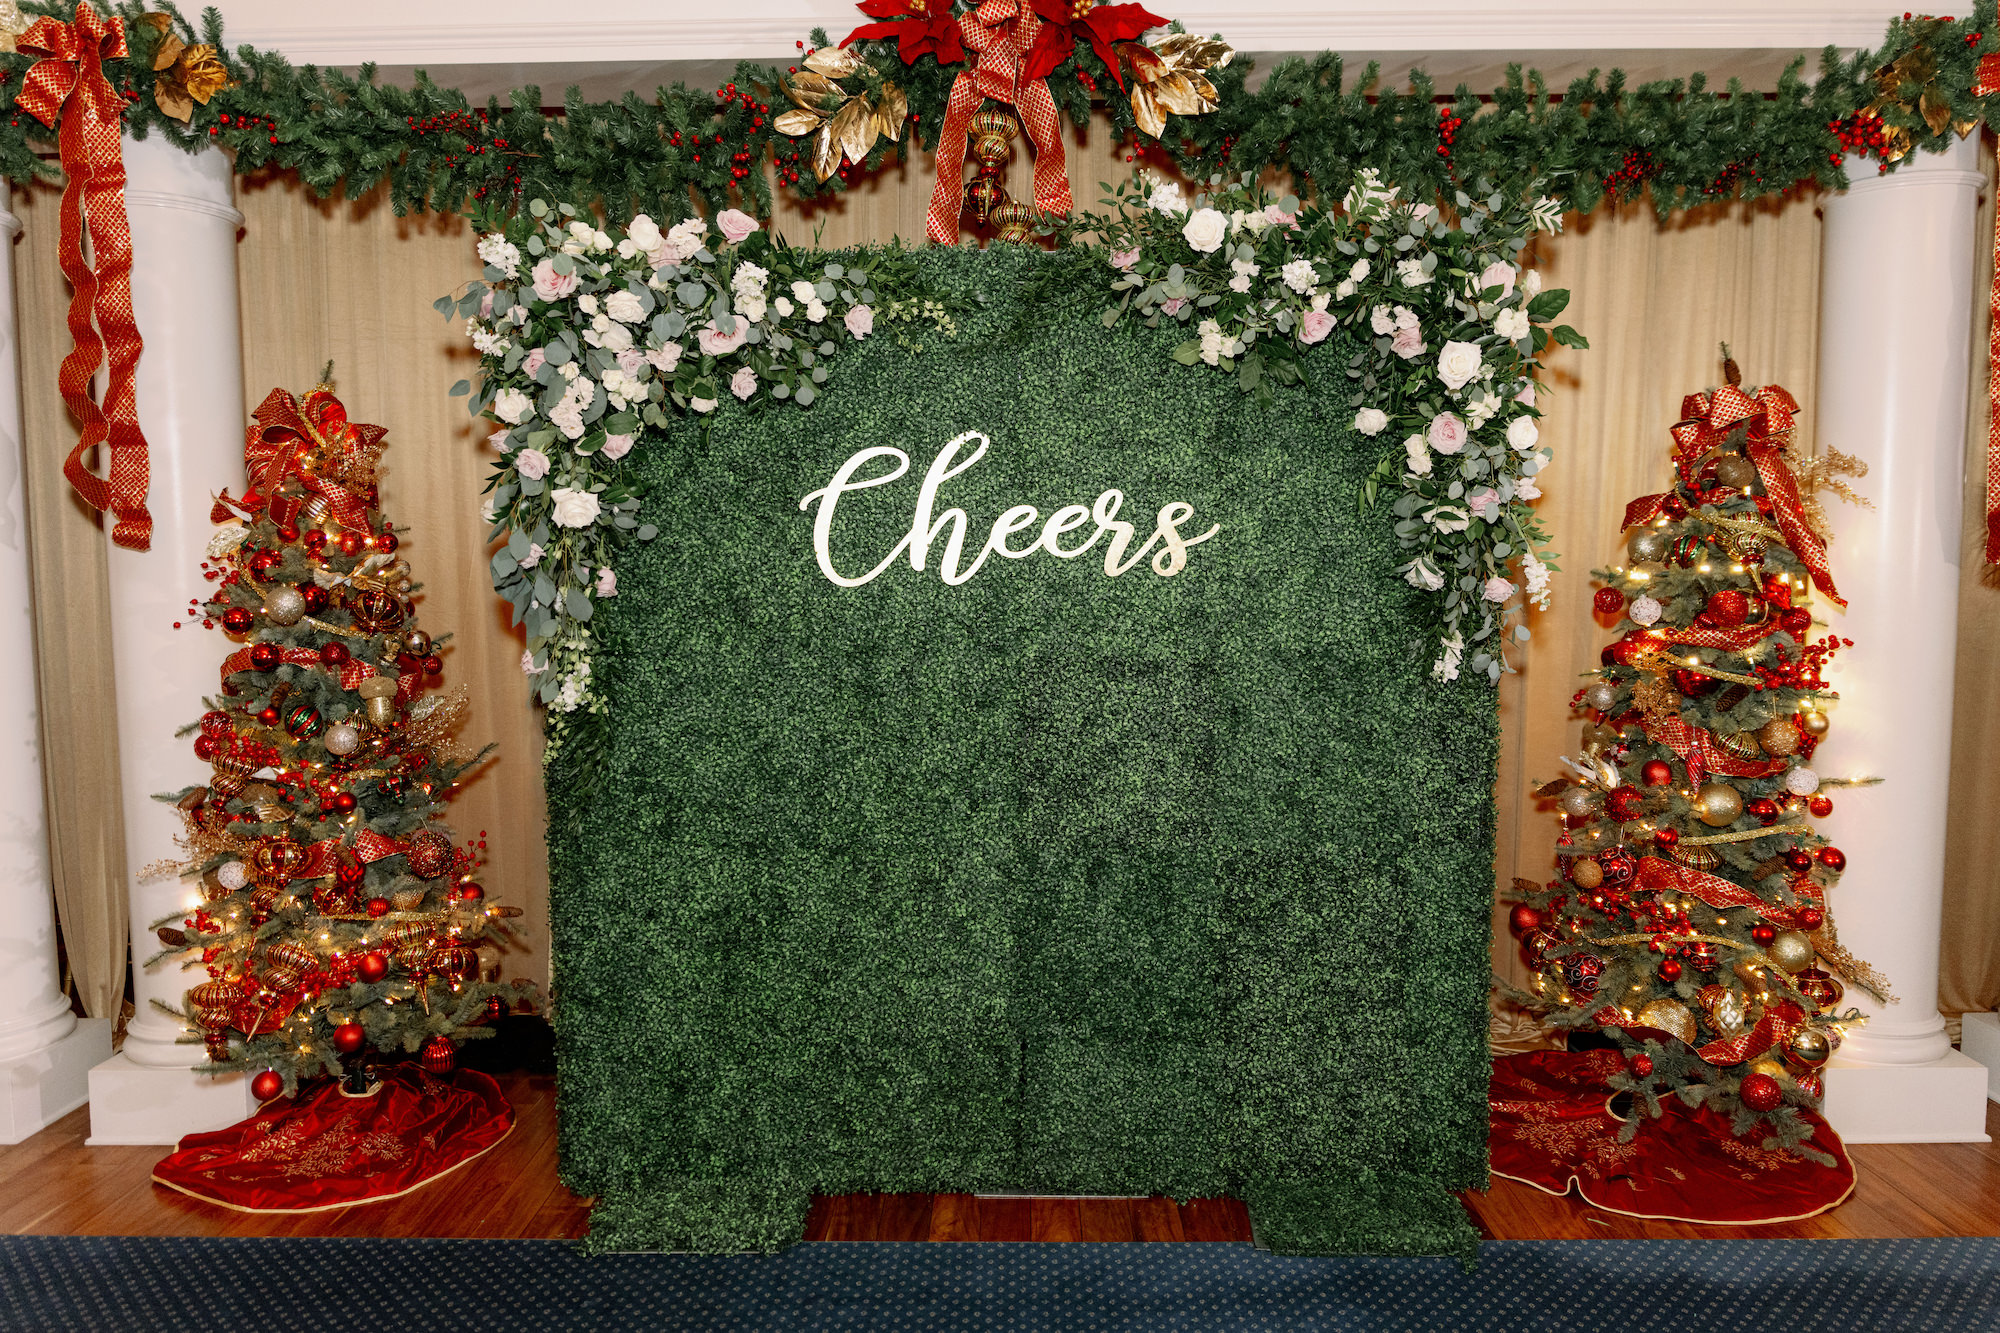 Cheers White Flowers and Eucalyptus Christmas Wedding Greenery Backdrop | Tampa Bay Florist Monarch Events and Design